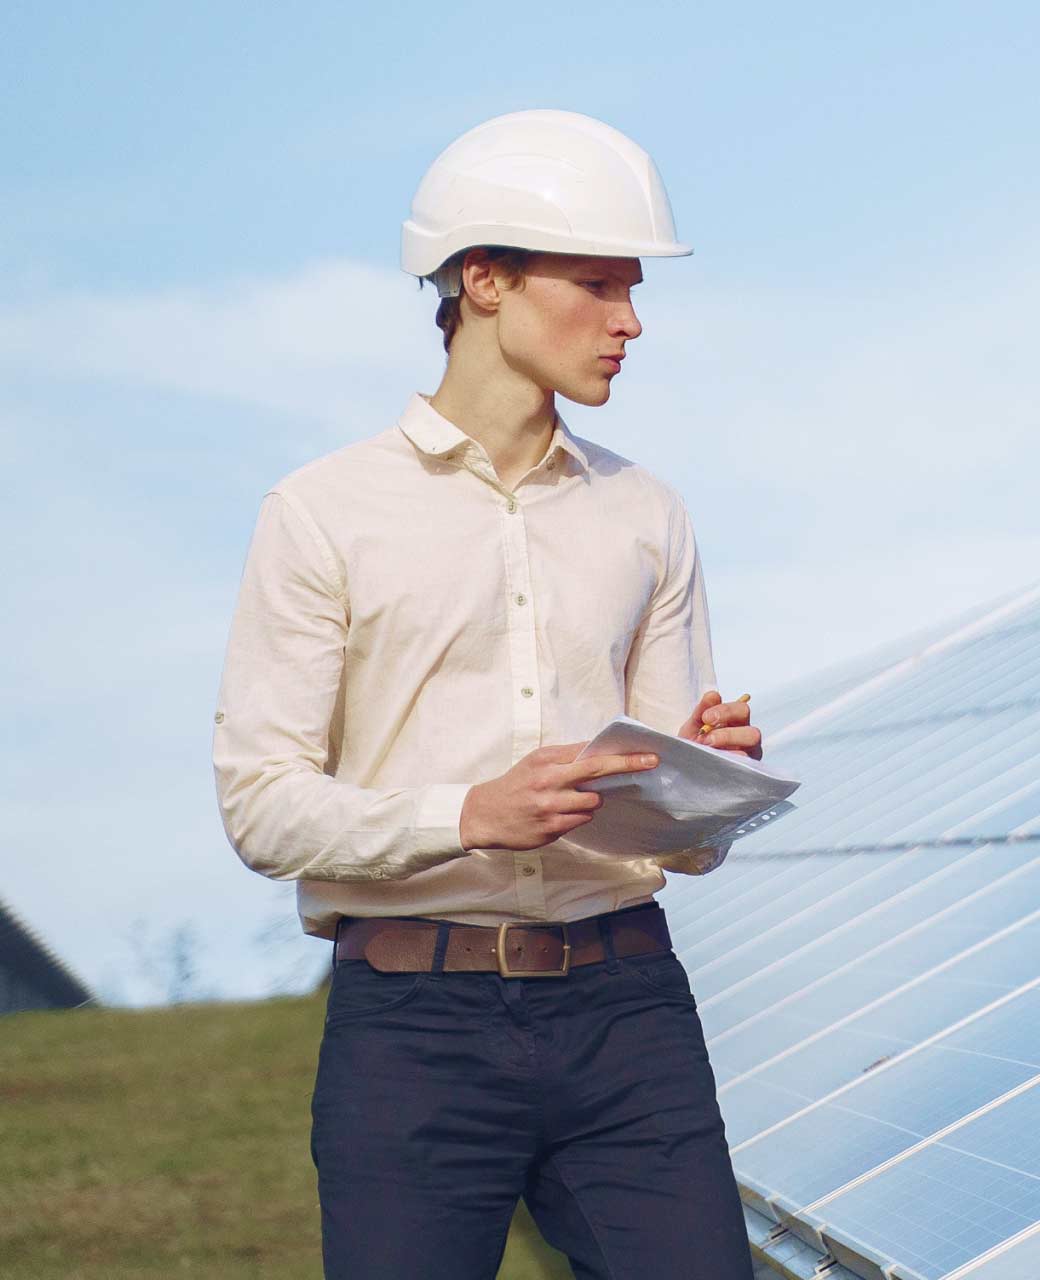 A man in a hard hat is holding a tablet in front of solar panels.